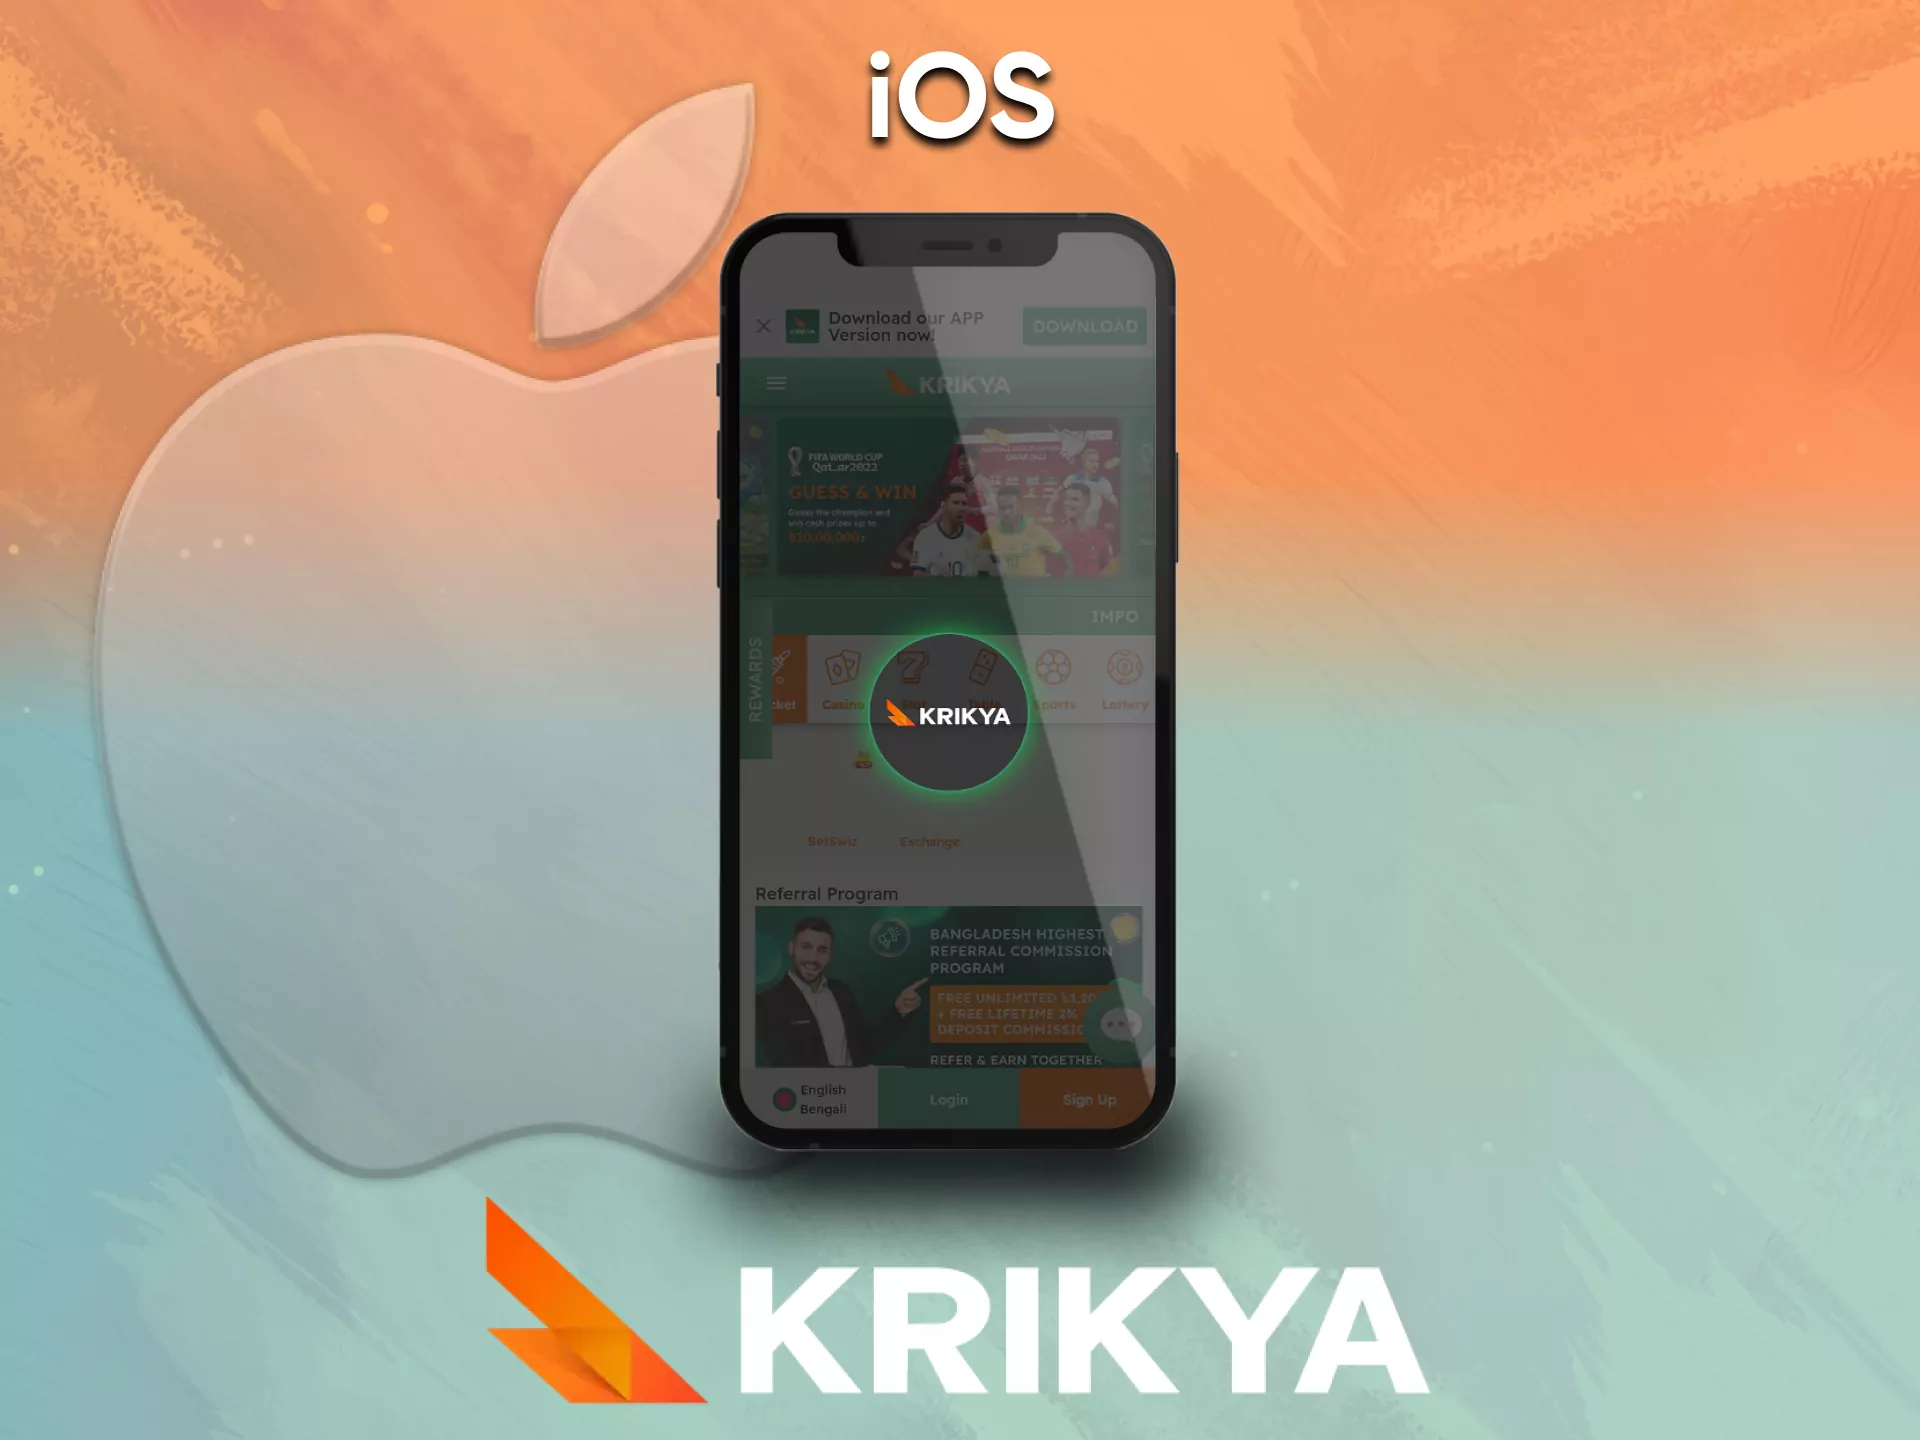 iOS is the system through which you can play at Krikya casino.